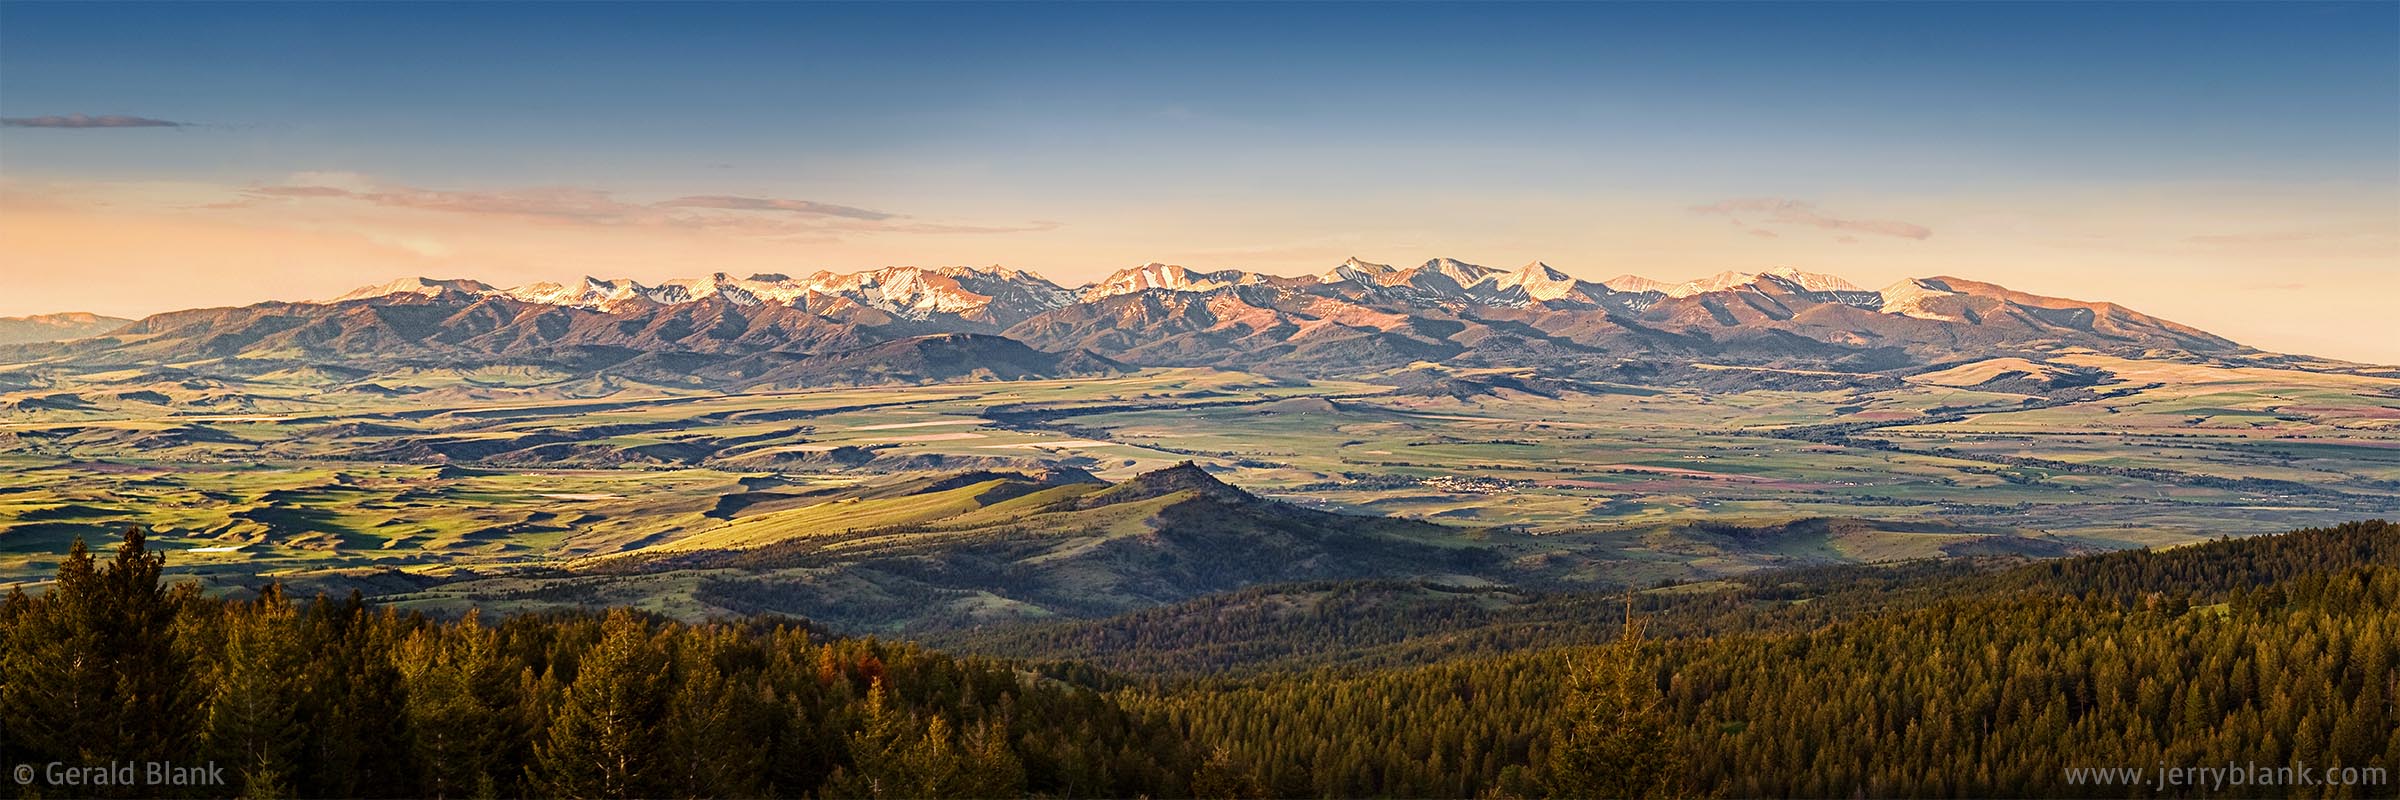 #07945 - Panoramic view of the Crazy Mountains in Montana, captured shortly before sunset in midsummer